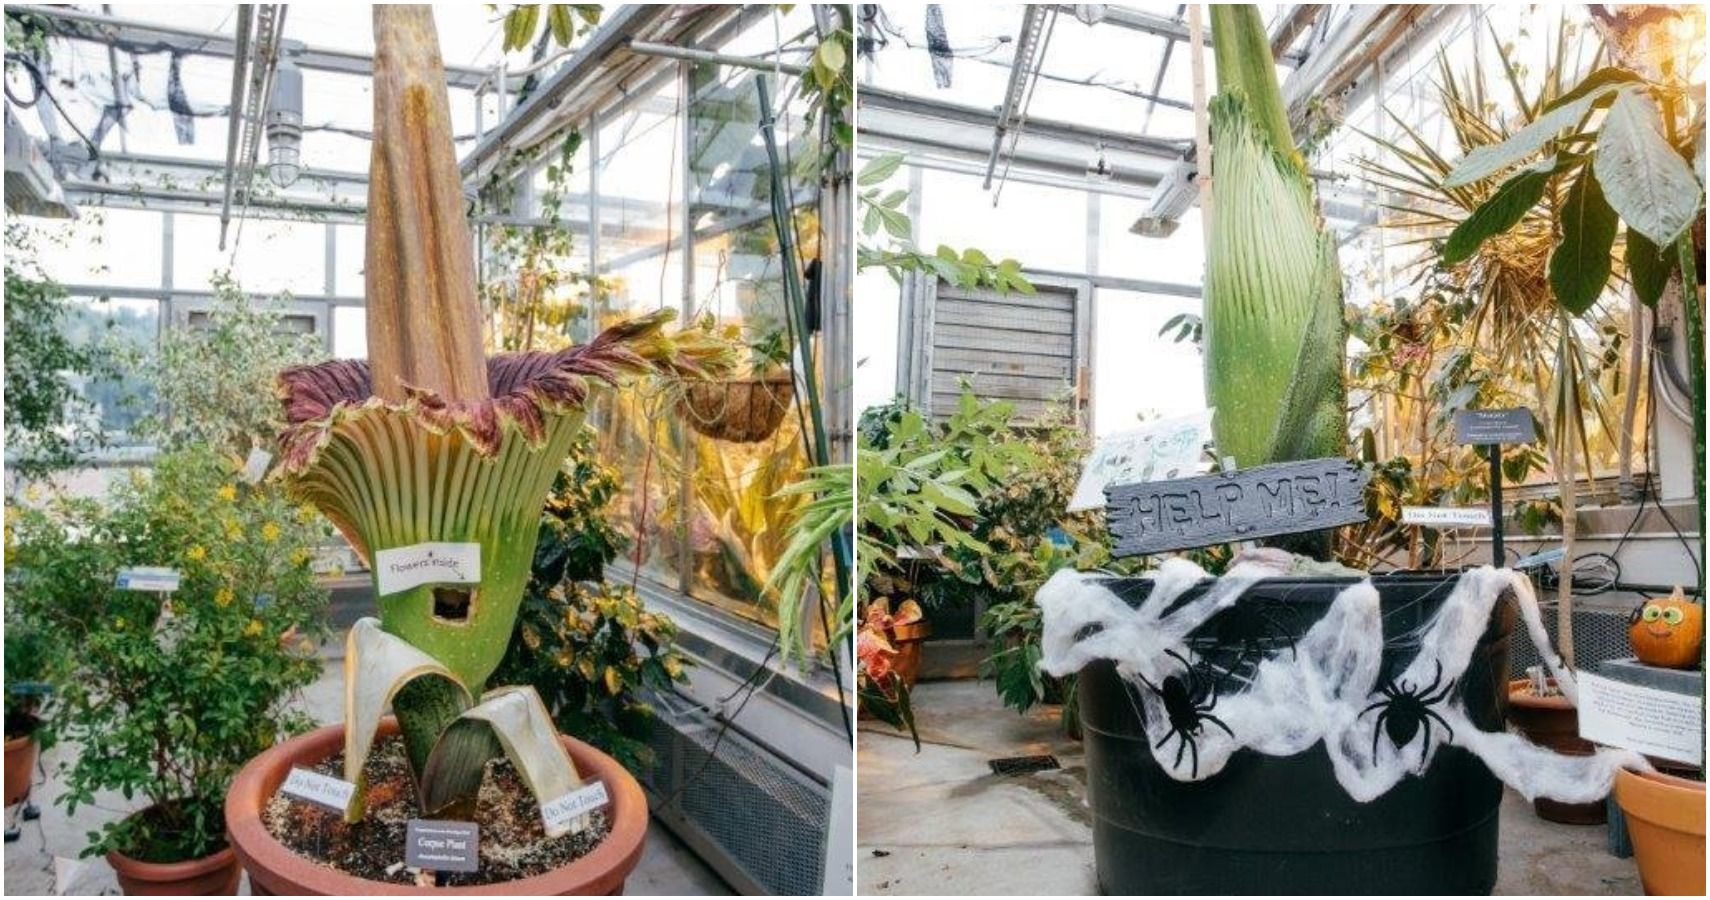 Putrid 'Corpse Flower' Ready To Bloom Just In Time For Halloween